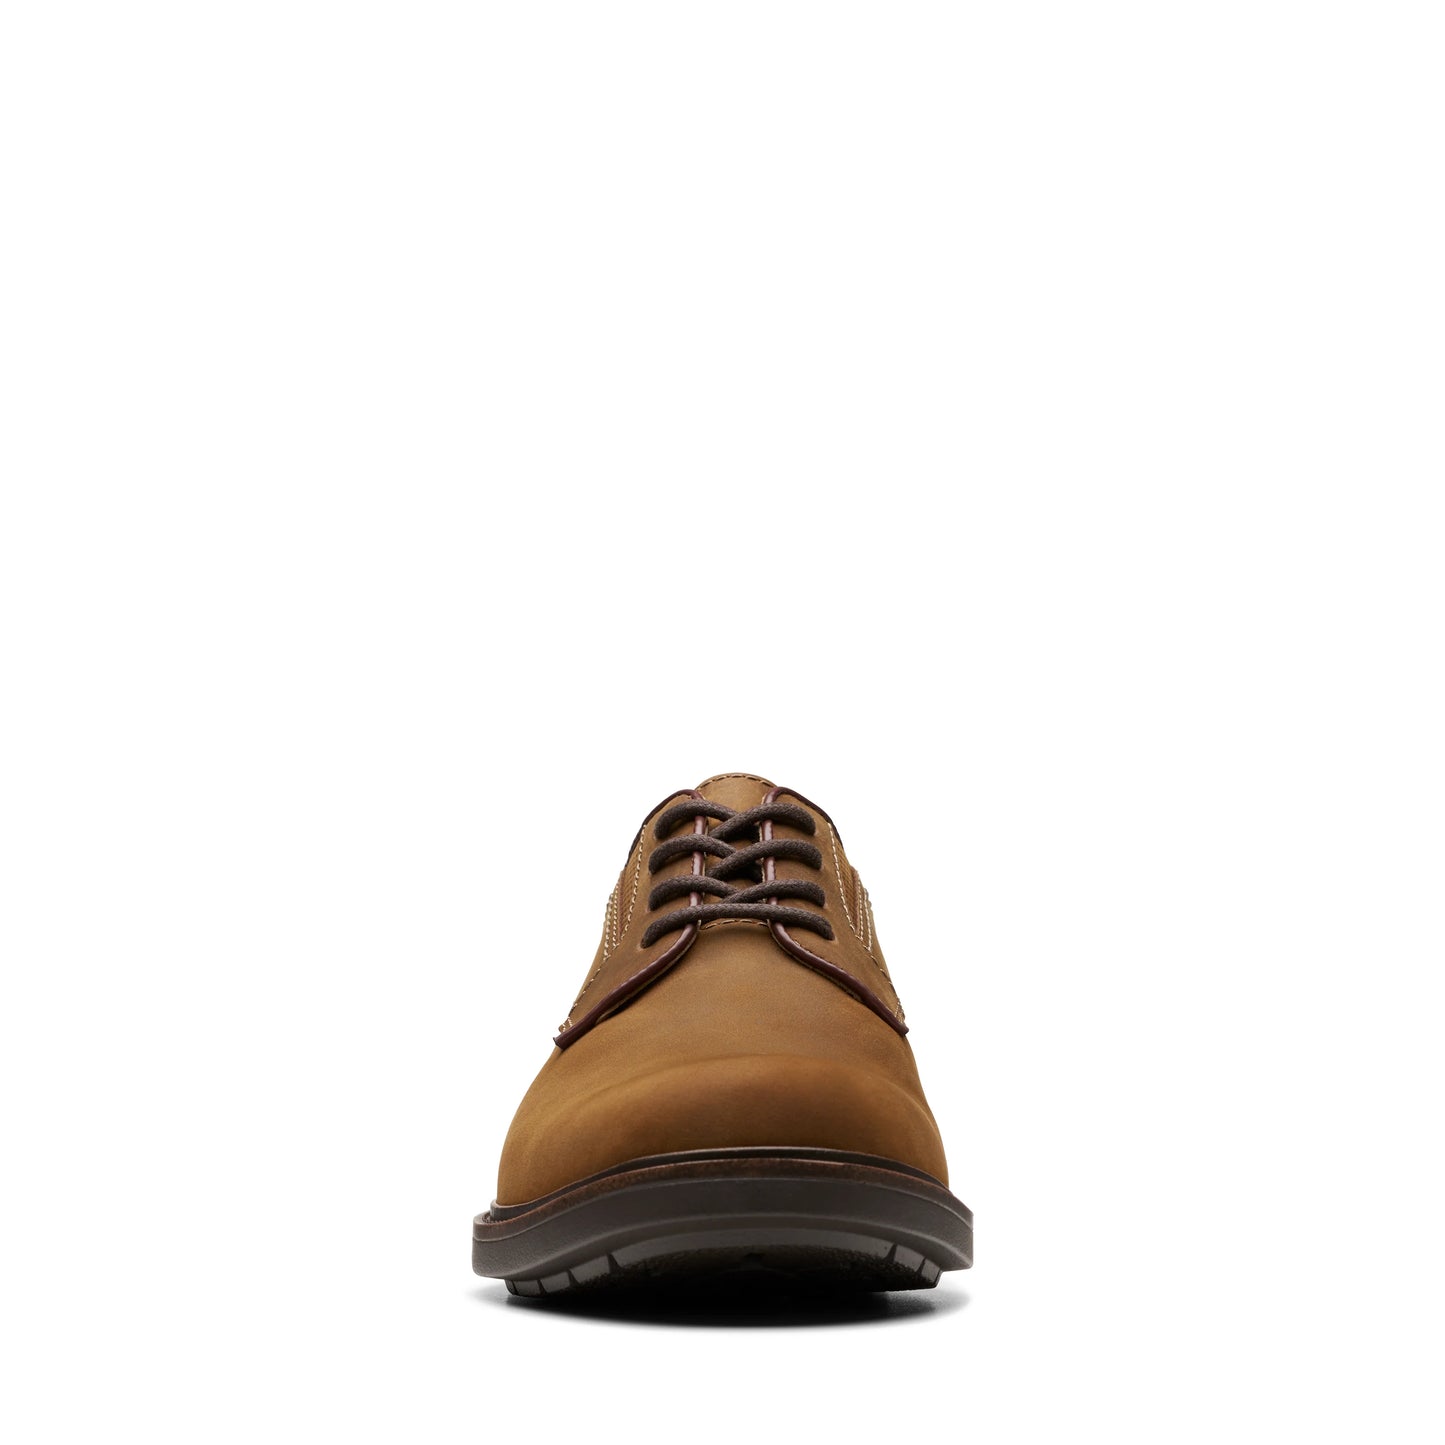 CLARKS | ZAPATOS DERBY HOMBRE | UN SHIRE LOW BEESWAX LEATHER | AMARILLO